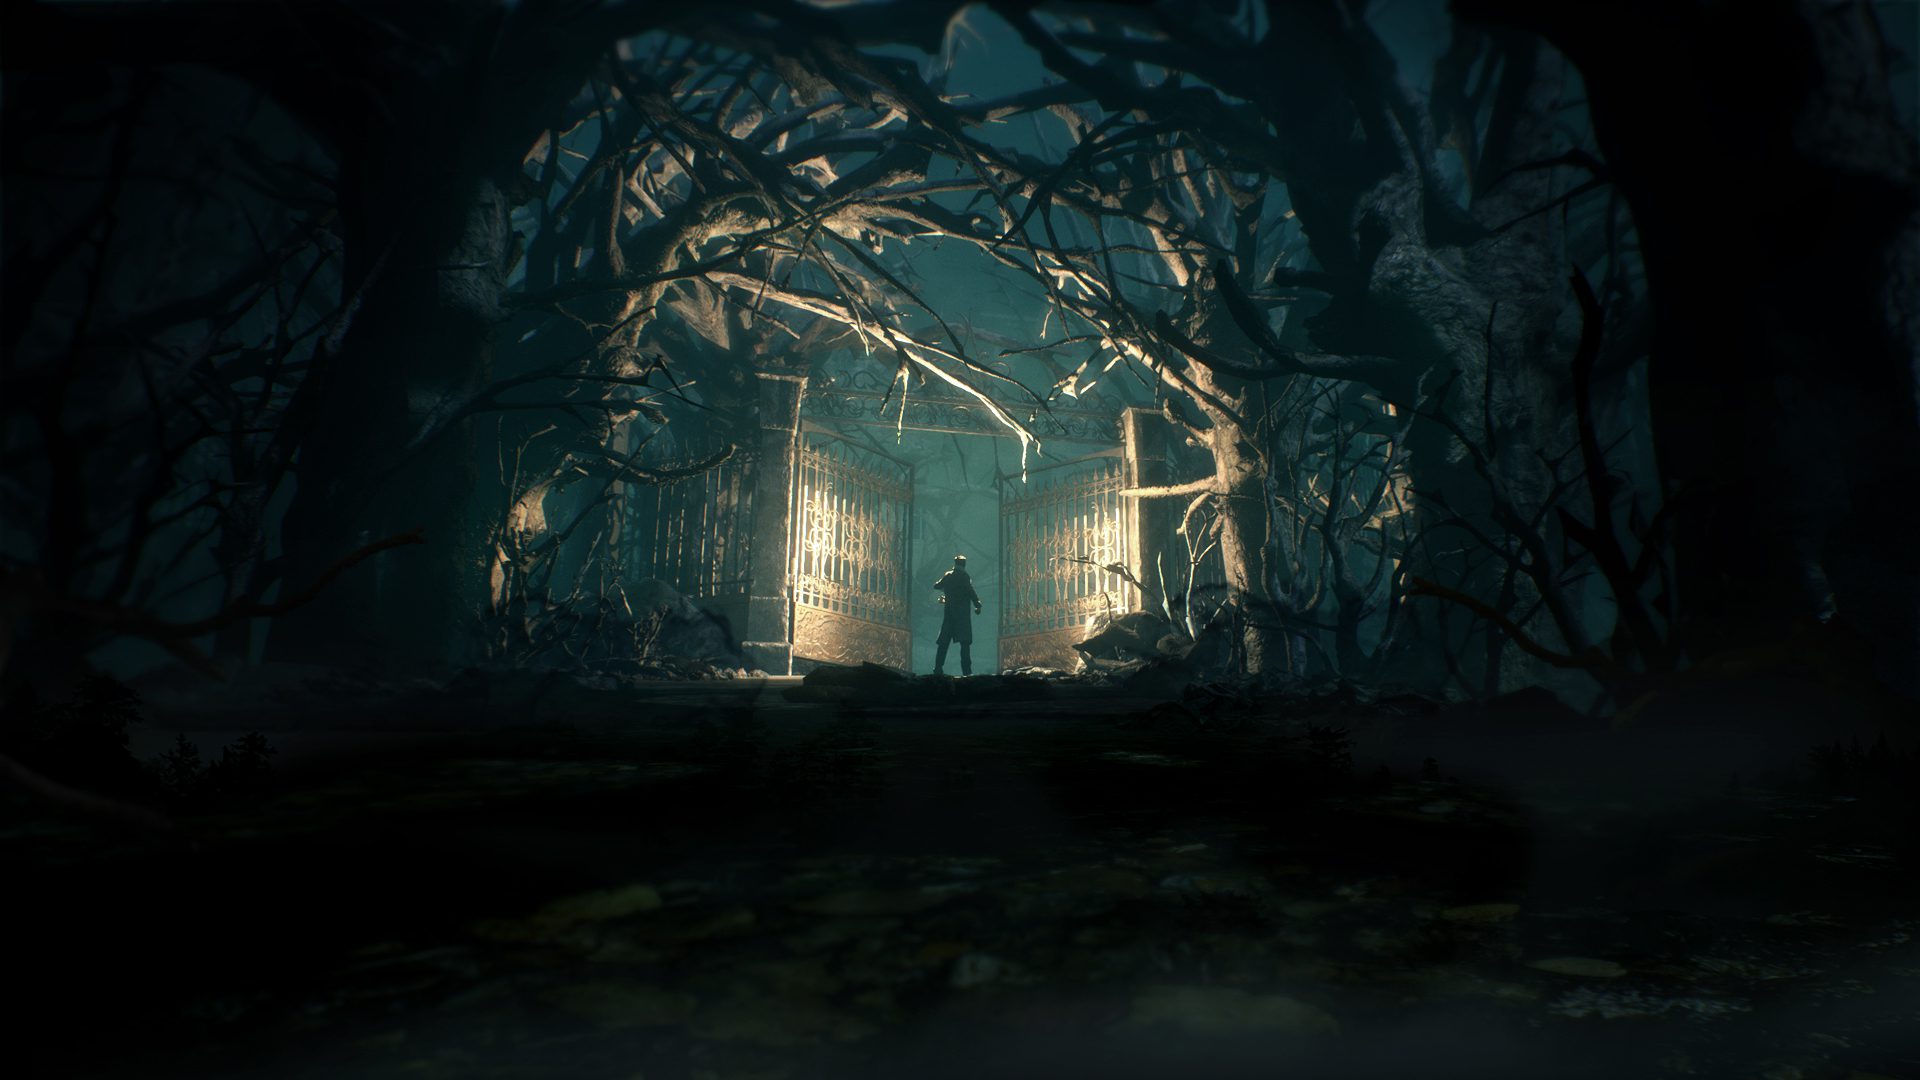 REVIEW : Call of Cthulhu (PC)